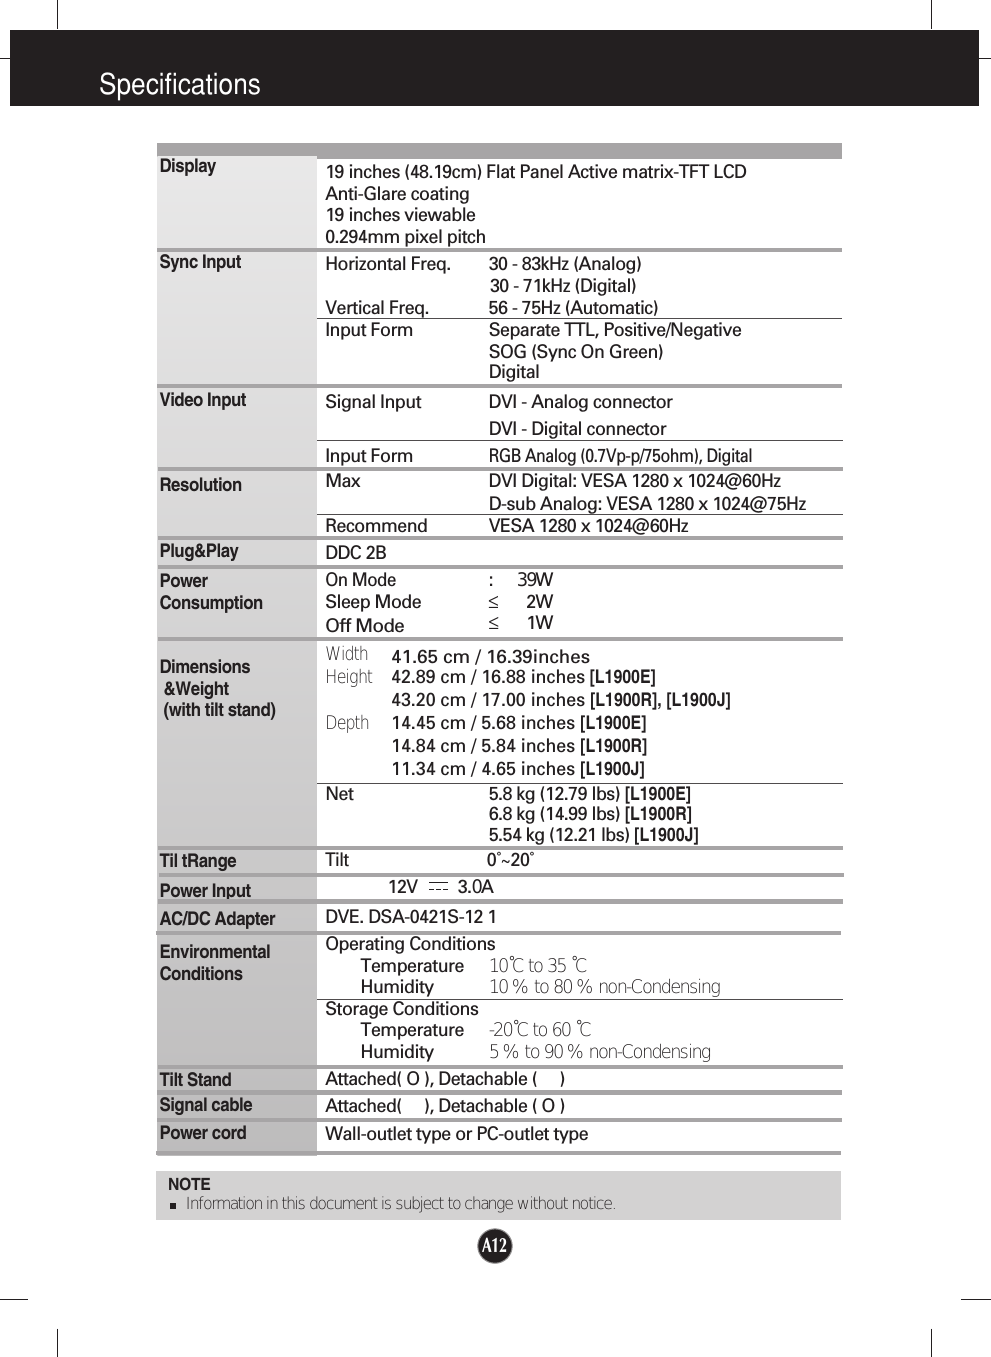 A12Specifications                                                                   NOTEInformation in this document is subject to change without notice.19 inches (48.19cm) Flat Panel Active matrix-TFT LCD Anti-Glare coating19 inches viewable0.294mm pixel pitchHorizontal Freq. 30 - 83kHz (Analog)30 - 71kHz (Digital)Vertical Freq. 56 - 75Hz (Automatic)Input Form Separate TTL, Positive/NegativeSOG (Sync On Green) DigitalSignal Input DVI - Analog connectorDVI - Digital connectorInput FormRGB Analog (0.7Vp-p/75ohm), DigitalMax DVI Digital: VESA 1280 x 1024@60Hz D-sub Analog: VESA 1280 x 1024@75HzRecommend VESA 1280 x 1024@60HzDDC 2BOn Mode : 39WSleep Mode ≤ 2WOff Mode≤1WWidth 41.65 cm / 16.39inchesHeight 42.89 cm / 16.88 inches[L1900E]43.20 cm / 17.00 inches [L1900R], [L1900J]Depth 14.45 cm / 5.68 inches [L1900E]14.84 cm / 5.84 inches [L1900R]11.34 cm / 4.65 inches [L1900J]Net 5.8 kg (12.79 lbs) [L1900E]6.8 kg (14.99 lbs) [L1900R]5.54 kg (12.21 lbs) [L1900J]Tilt0˚~20˚12V         3.0ADVE. DSA-0421S-12 1Operating ConditionsTemperature 10˚C to 35 ˚CHumidity 10 % to 80 % non-CondensingStorage ConditionsTemperature -20˚C to 60 ˚CHumidity 5 % to 90 % non-CondensingAttached( O ), Detachable (     )Attached(     ), Detachable ( O )Wall-outlet type or PC-outlet typeDisplaySync InputVideo InputResolutionPlug&amp;PlayPowerConsumptionDimensions&amp;Weight(with tilt stand)Til tRangePower InputAC/DC AdapterEnvironmentalConditionsTilt StandSignal cablePower cord